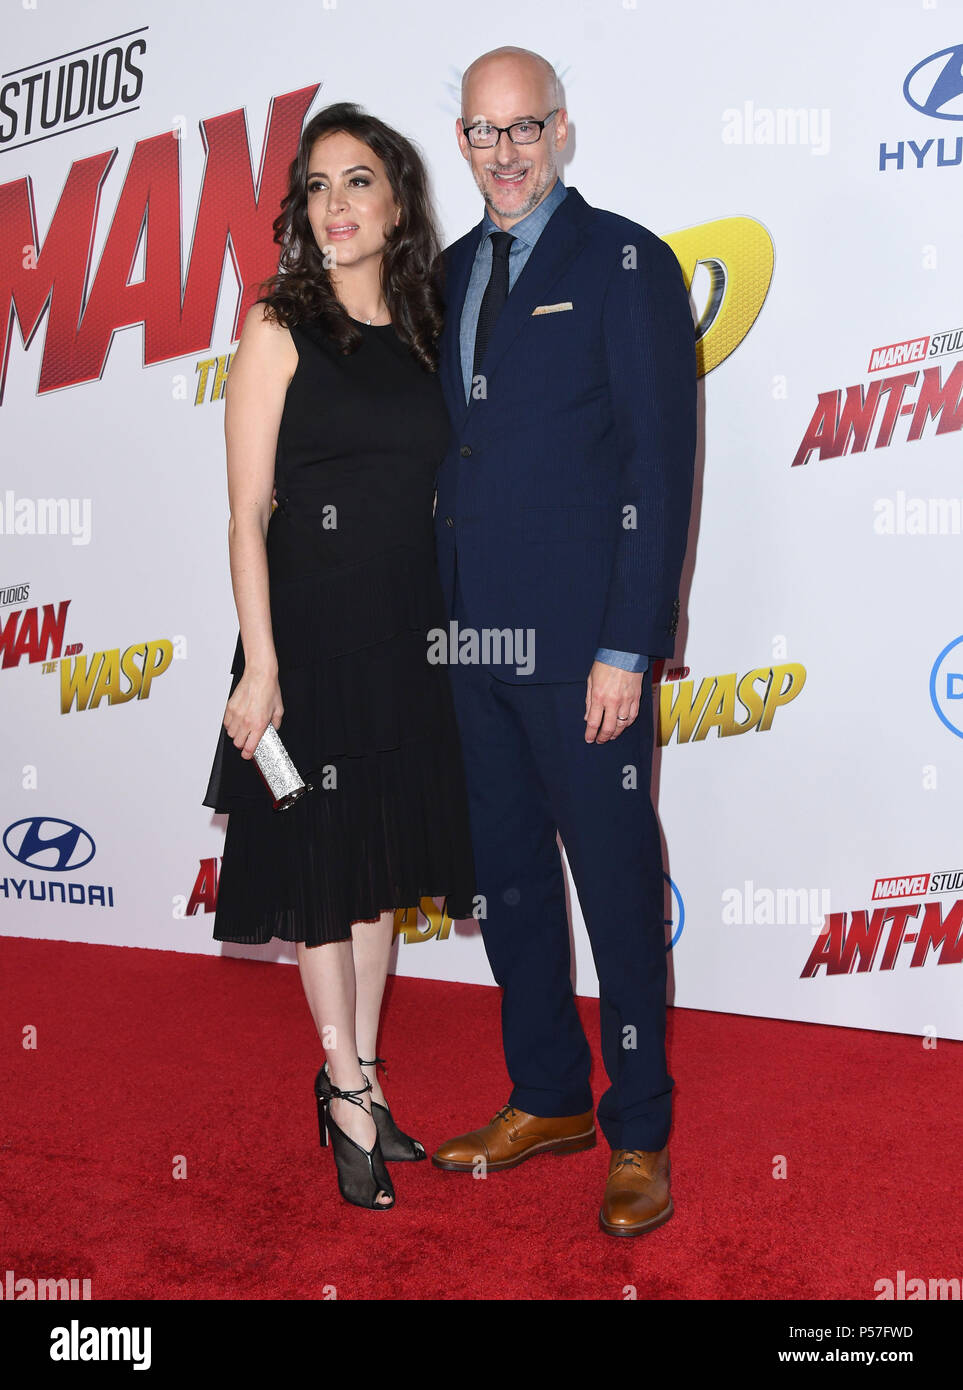 Hollywood, CA, USA. 25th June, 2018. 25 June 2018 - Hollywood, California - Peyton Reed. ''Ant-Man and The Wasp' Los Angeles Premiere held at theEl Capitan Theatre. Photo Credit: Birdie Thompson/AdMedia Credit: Birdie Thompson/AdMedia/ZUMA Wire/Alamy Live News Stock Photo